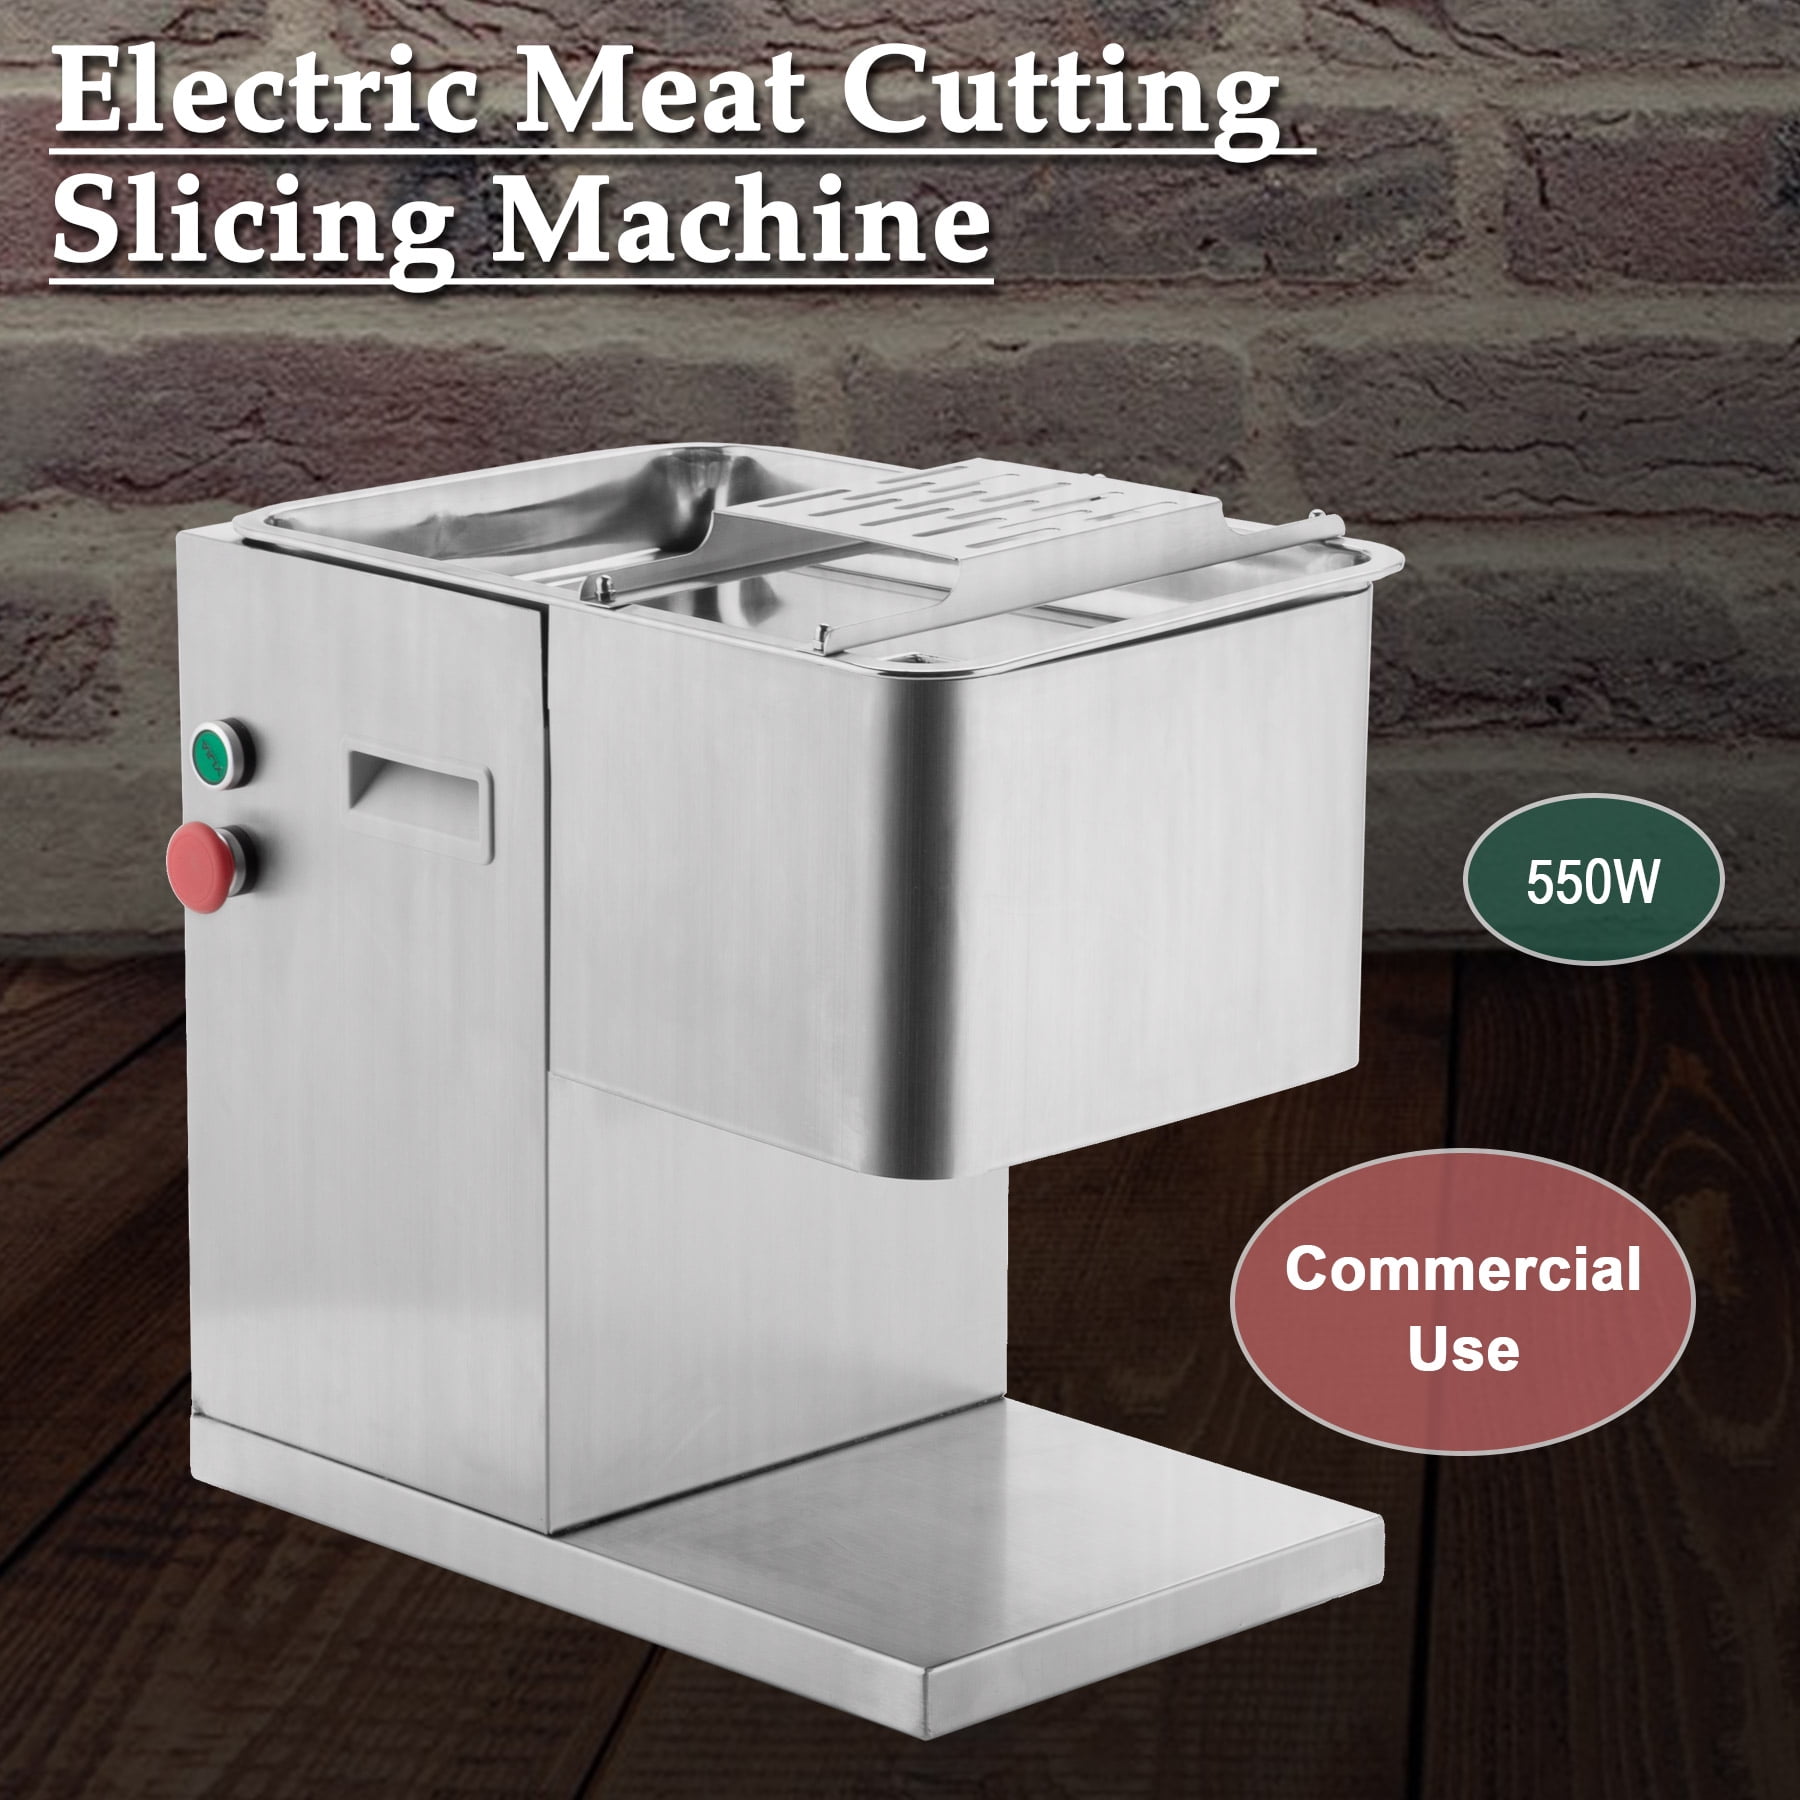 Details about   Desktop Electric Meat Slicing Shredding Cutting Machine and Meat Cutter Slicers 